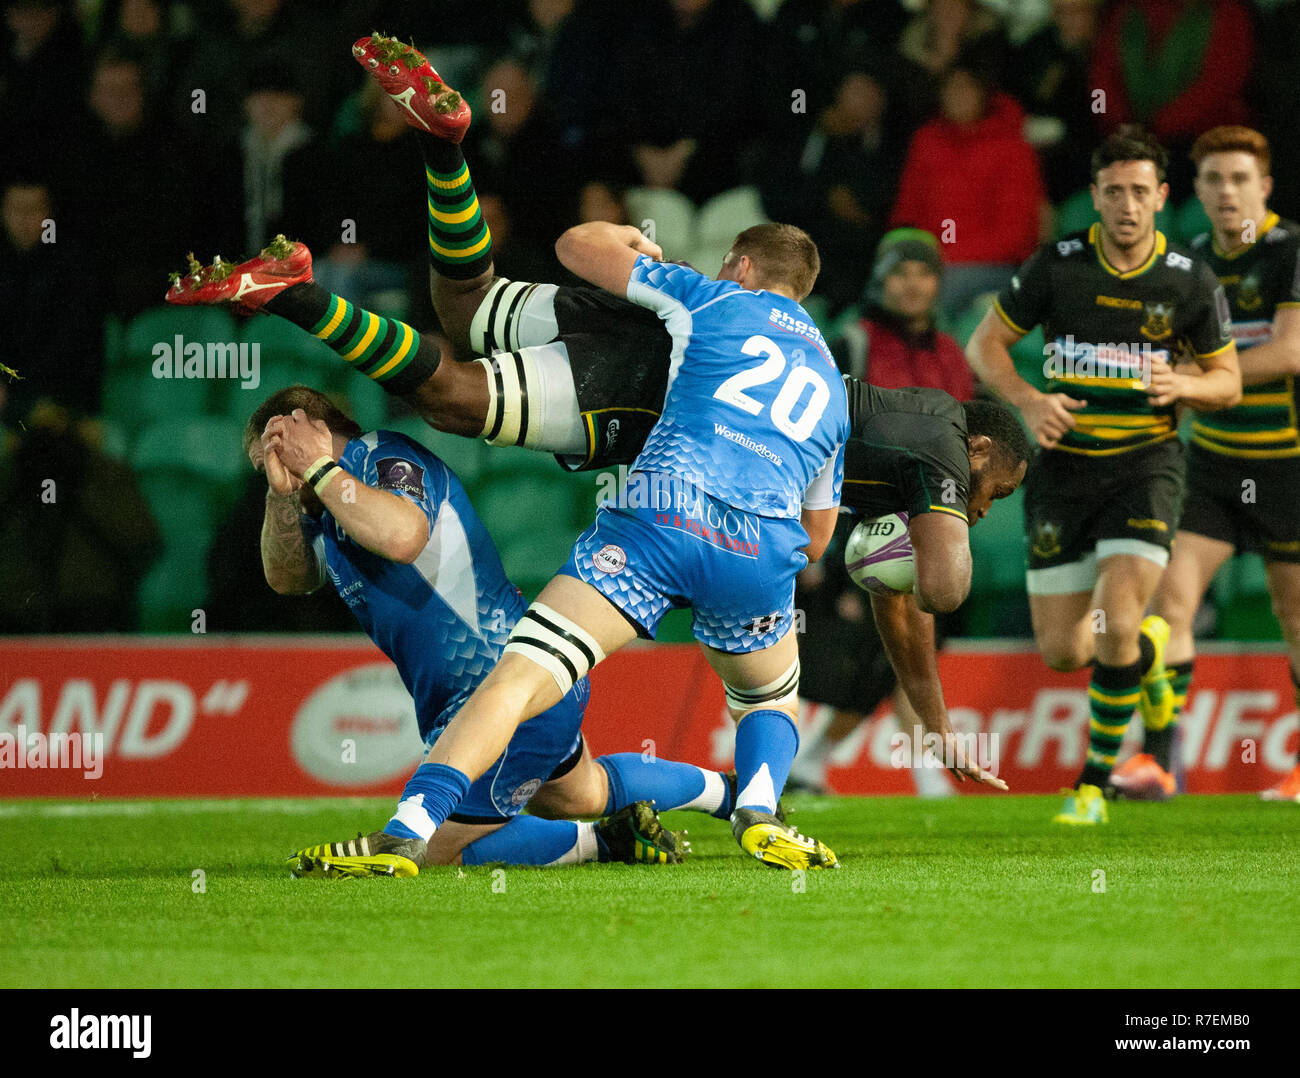 Northampton, UK. 8th December 2018. Api Ratuniyarawa of Northampton Saints is tackled by Huw Taylor during the European Rugby Challenge Cup match between Northampton Saints and Dragons. Andrew Taylor/Alamy Live News Stock Photo